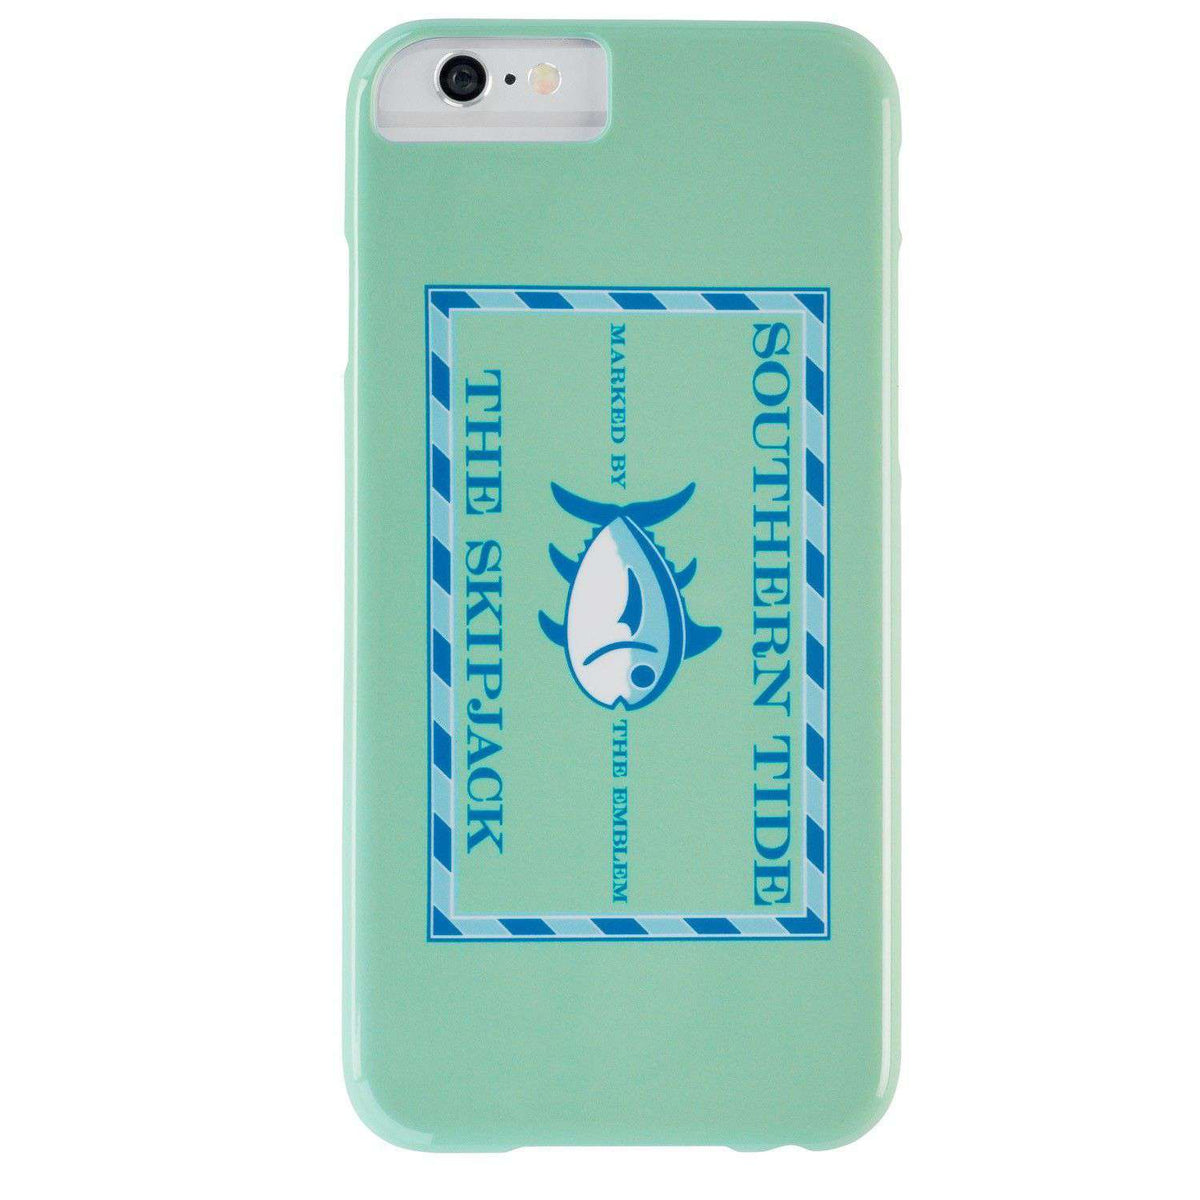 Original Skipjack iPhone 6/6s Case in Offshore Green by Southern Tide - Country Club Prep